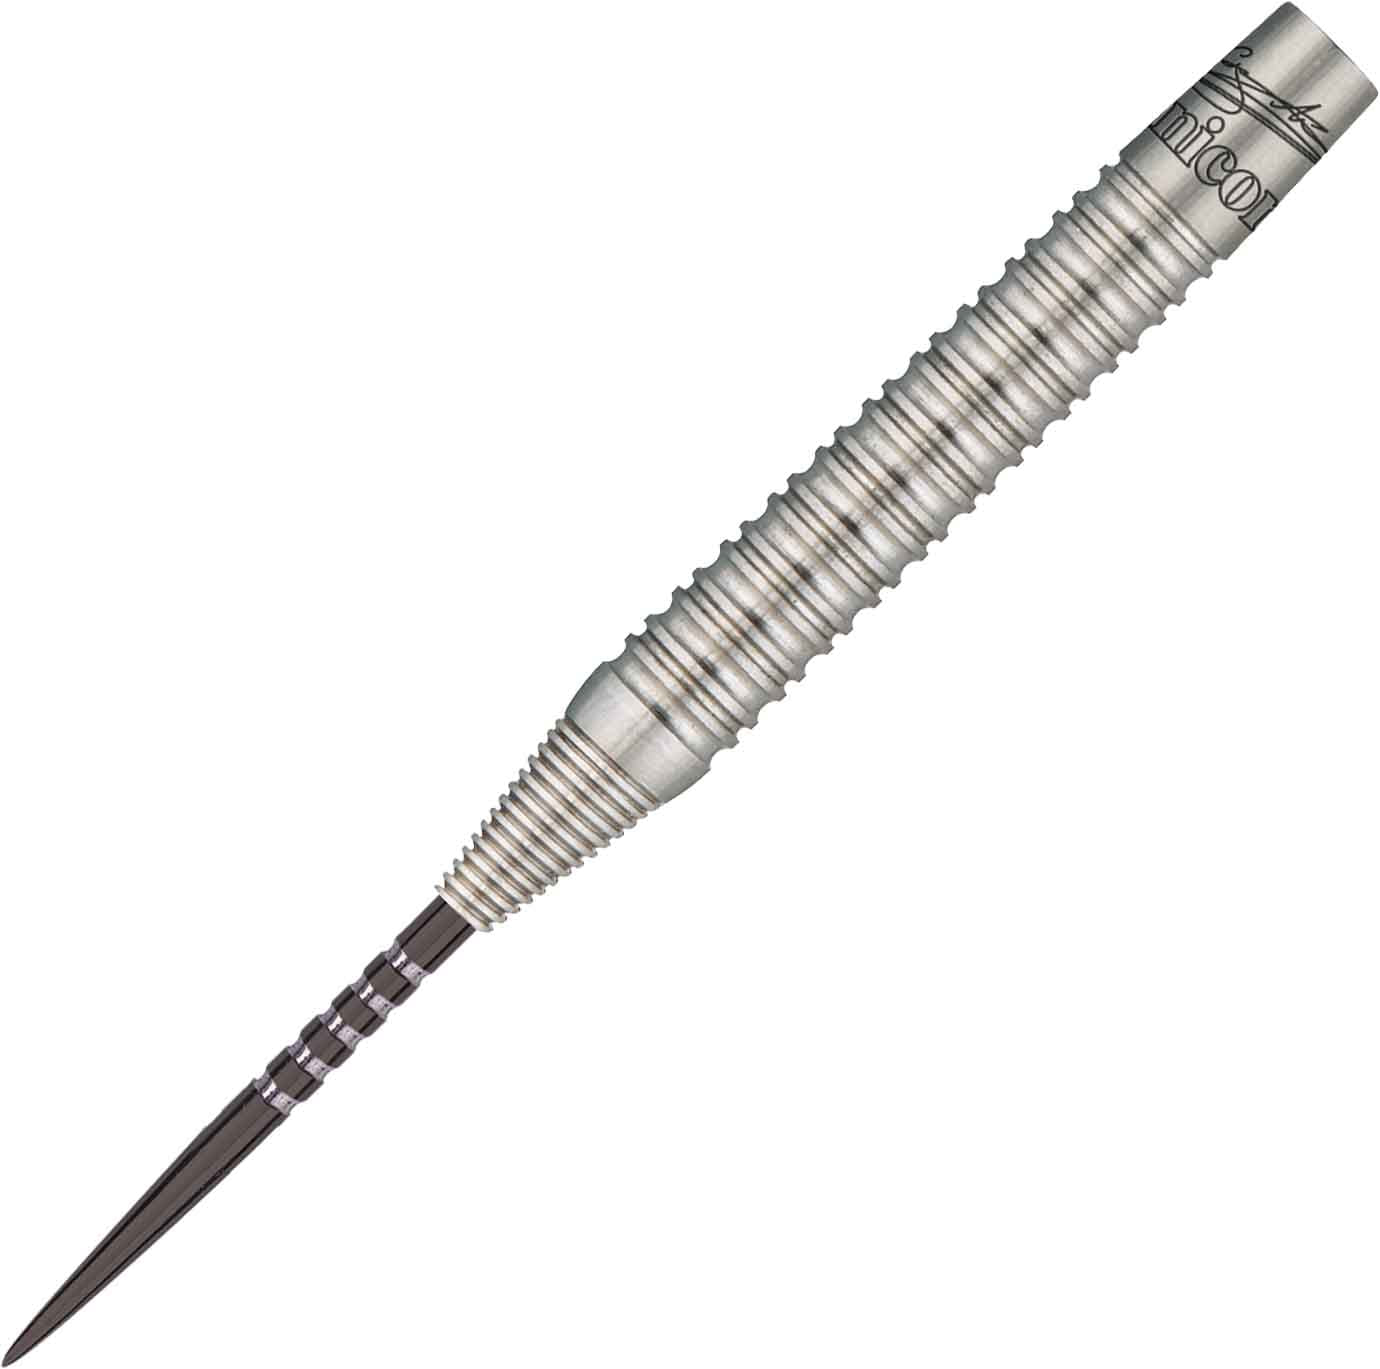 Unicorn Purist Gary Anderson Phase 4 Steel Tip Barrels Only - 27gm